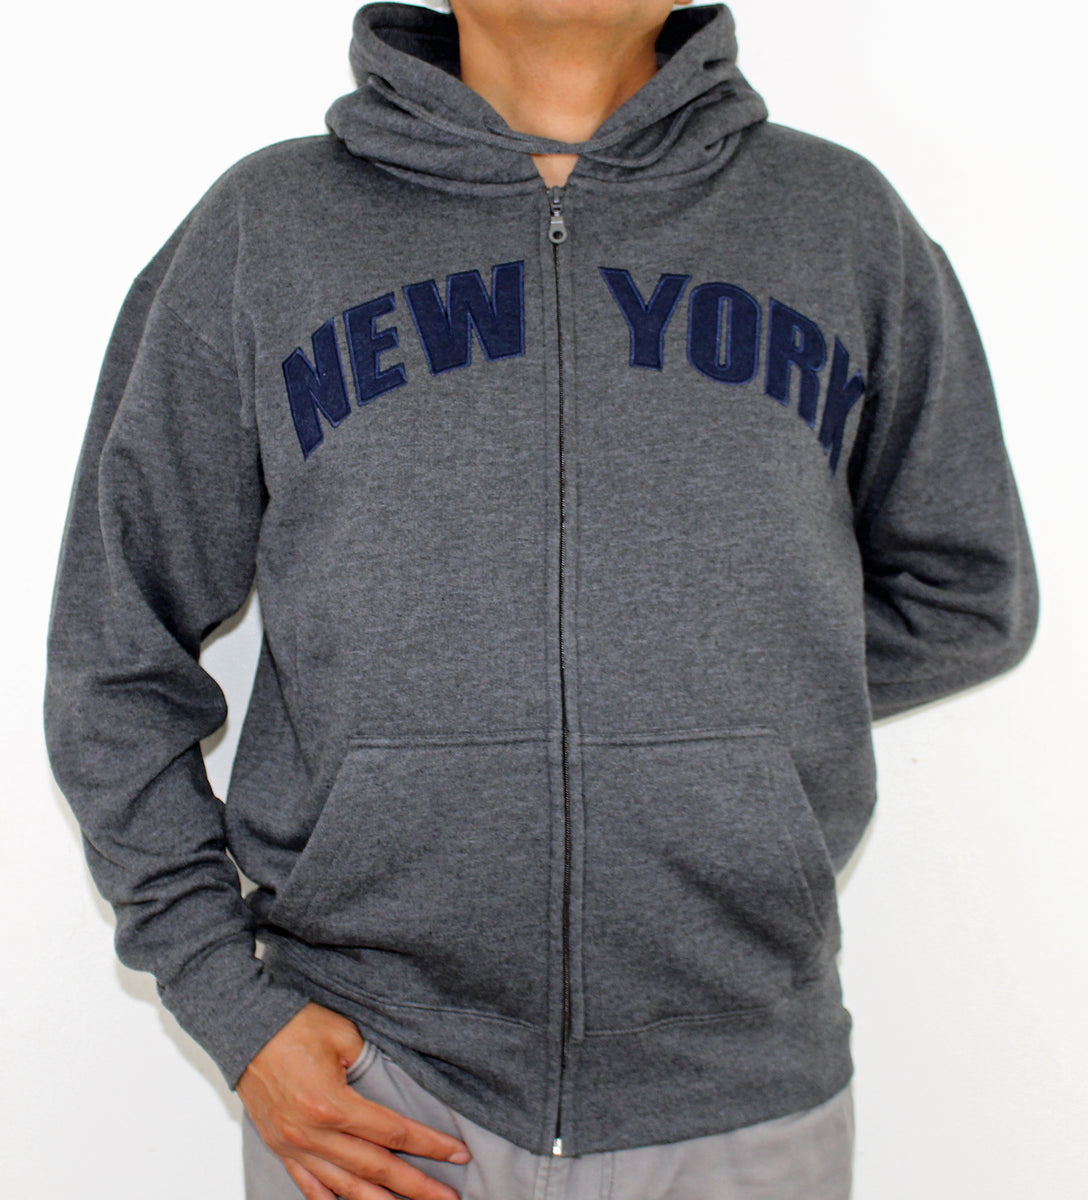 Adult Zipper Hoodies Embroidered with